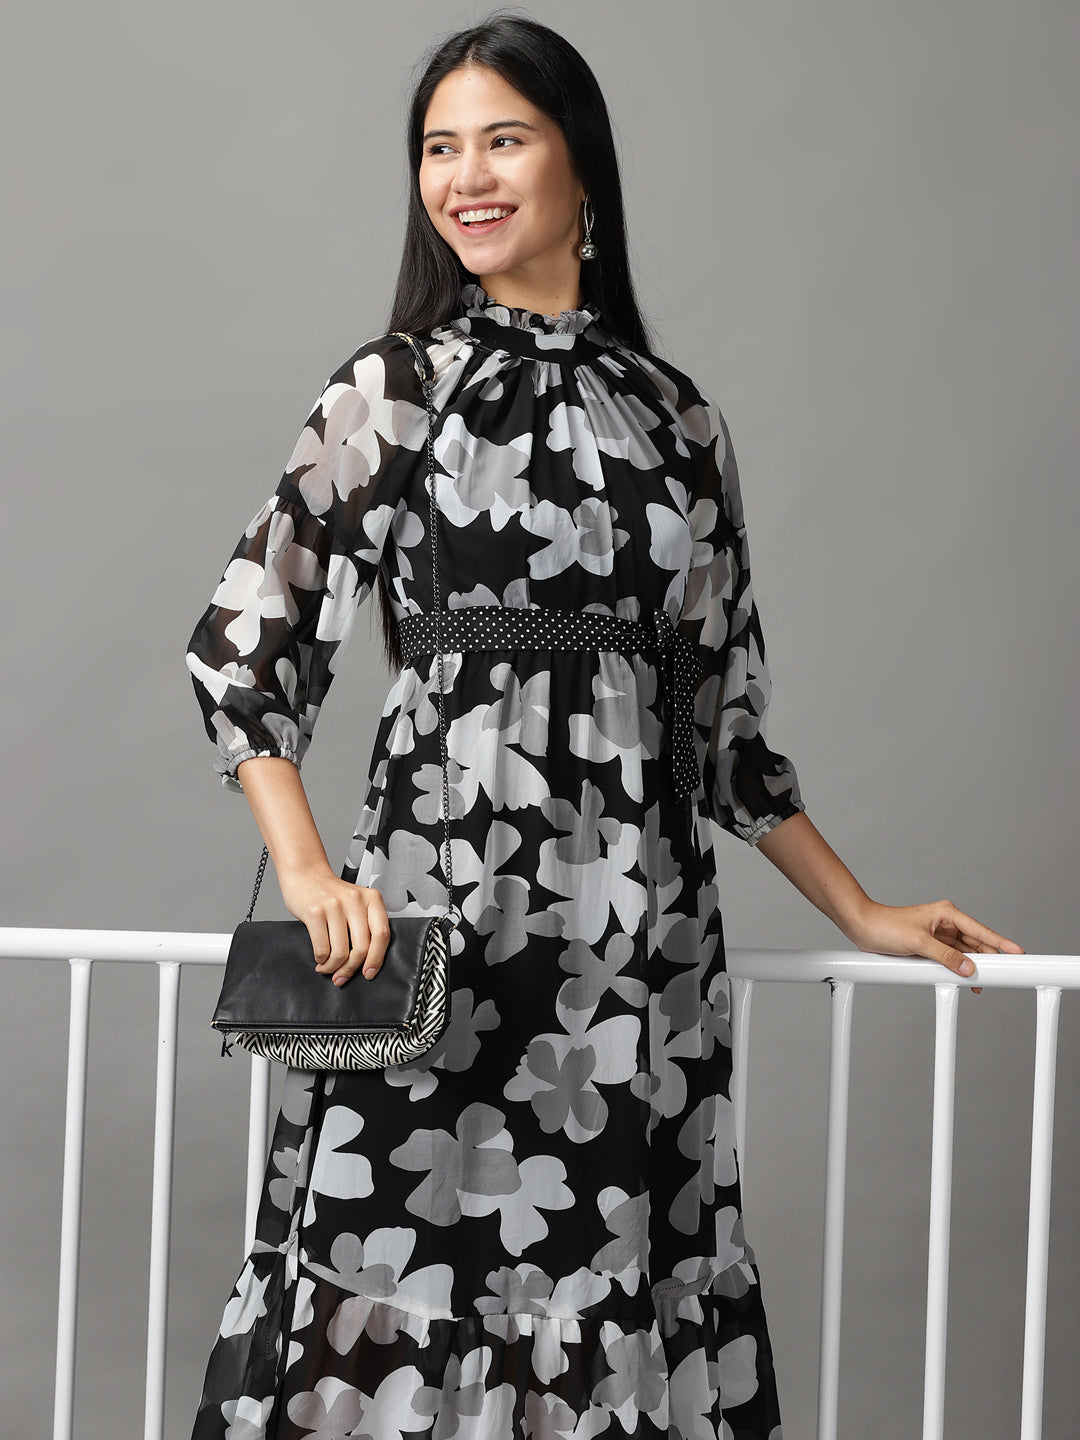 Women's Black Floral Fit and Flare Dress